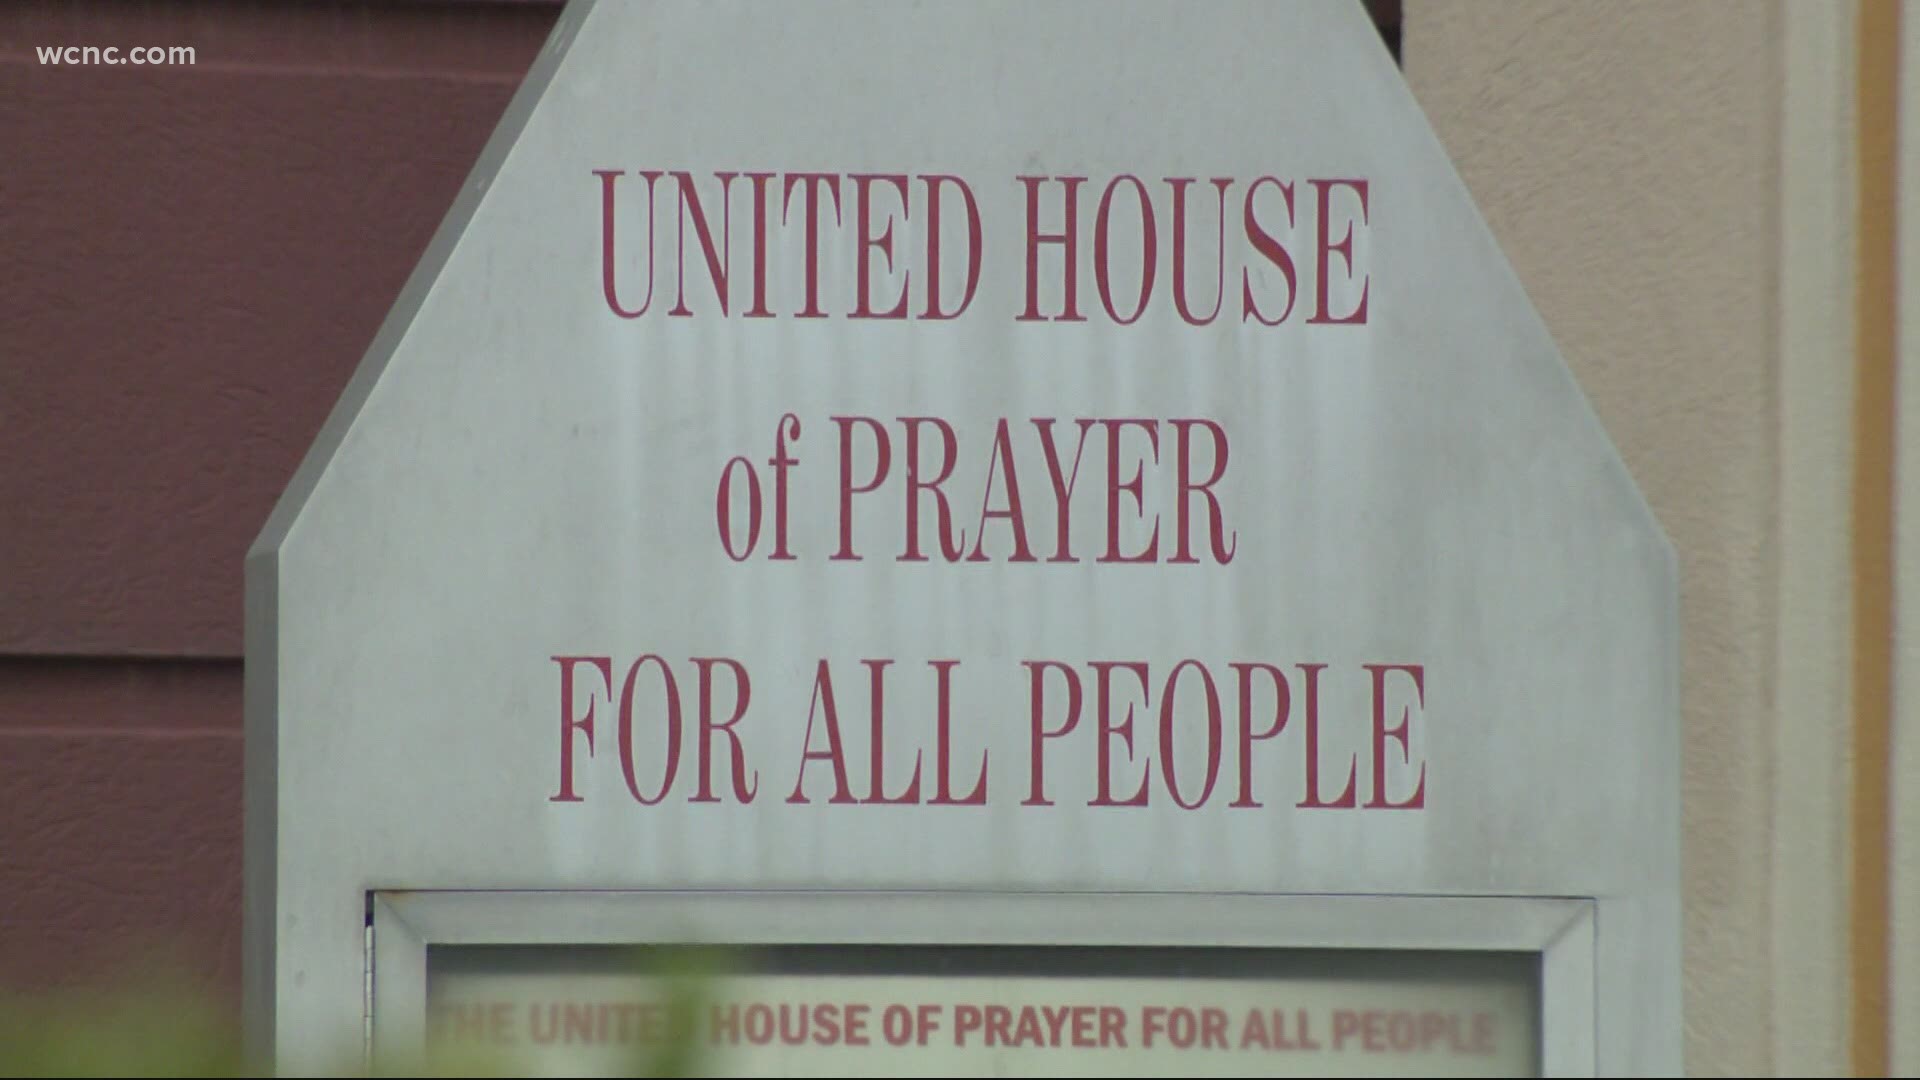 The pastor of the United House of Prayer for All People is facing new allegations after a COVID-19 outbreak at the church is linked to 140 new cases.